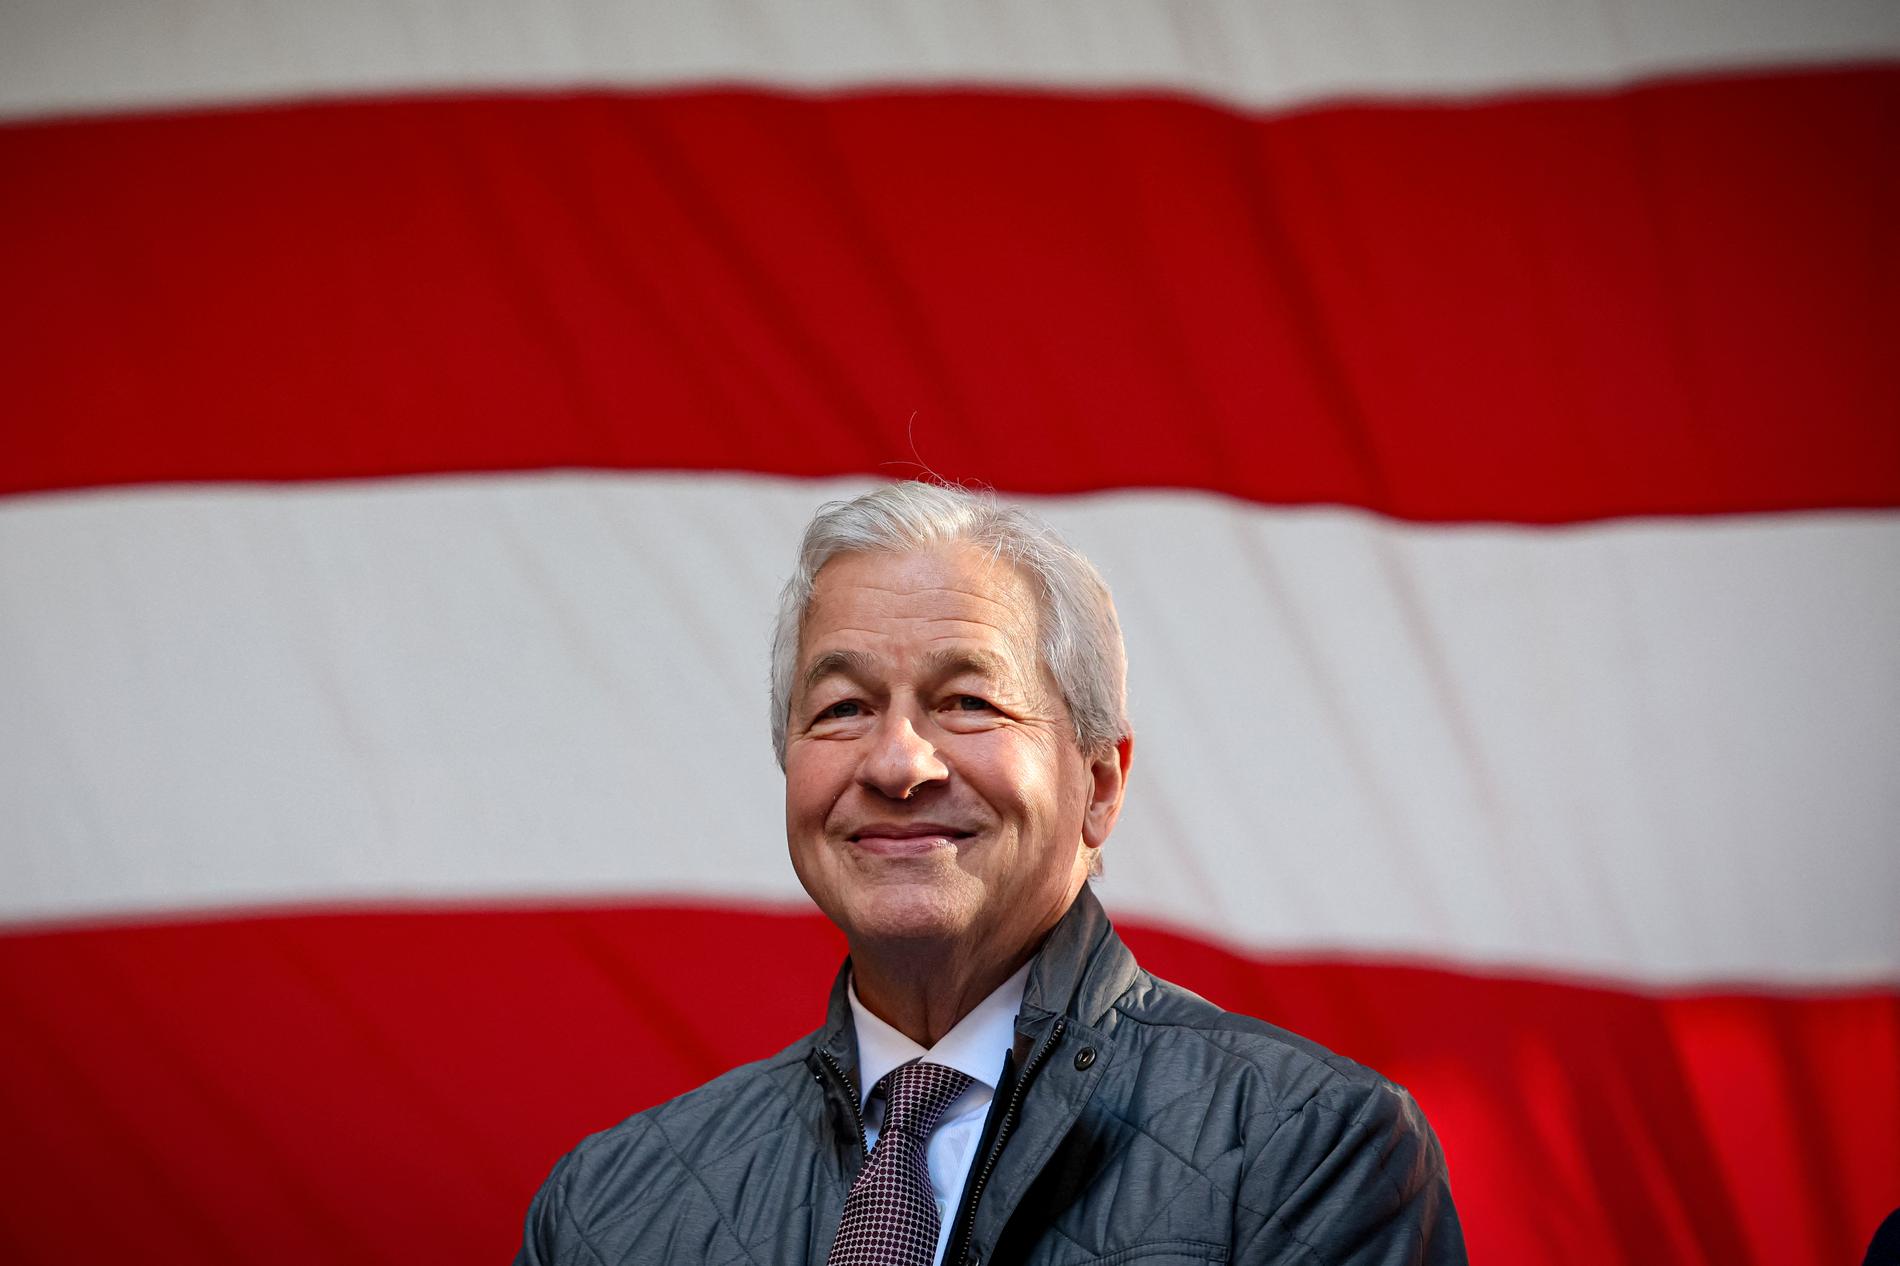 JPMorgan Chase CEO Jamie Dimon’s Salary Increases by NOK 15 Million in 2023